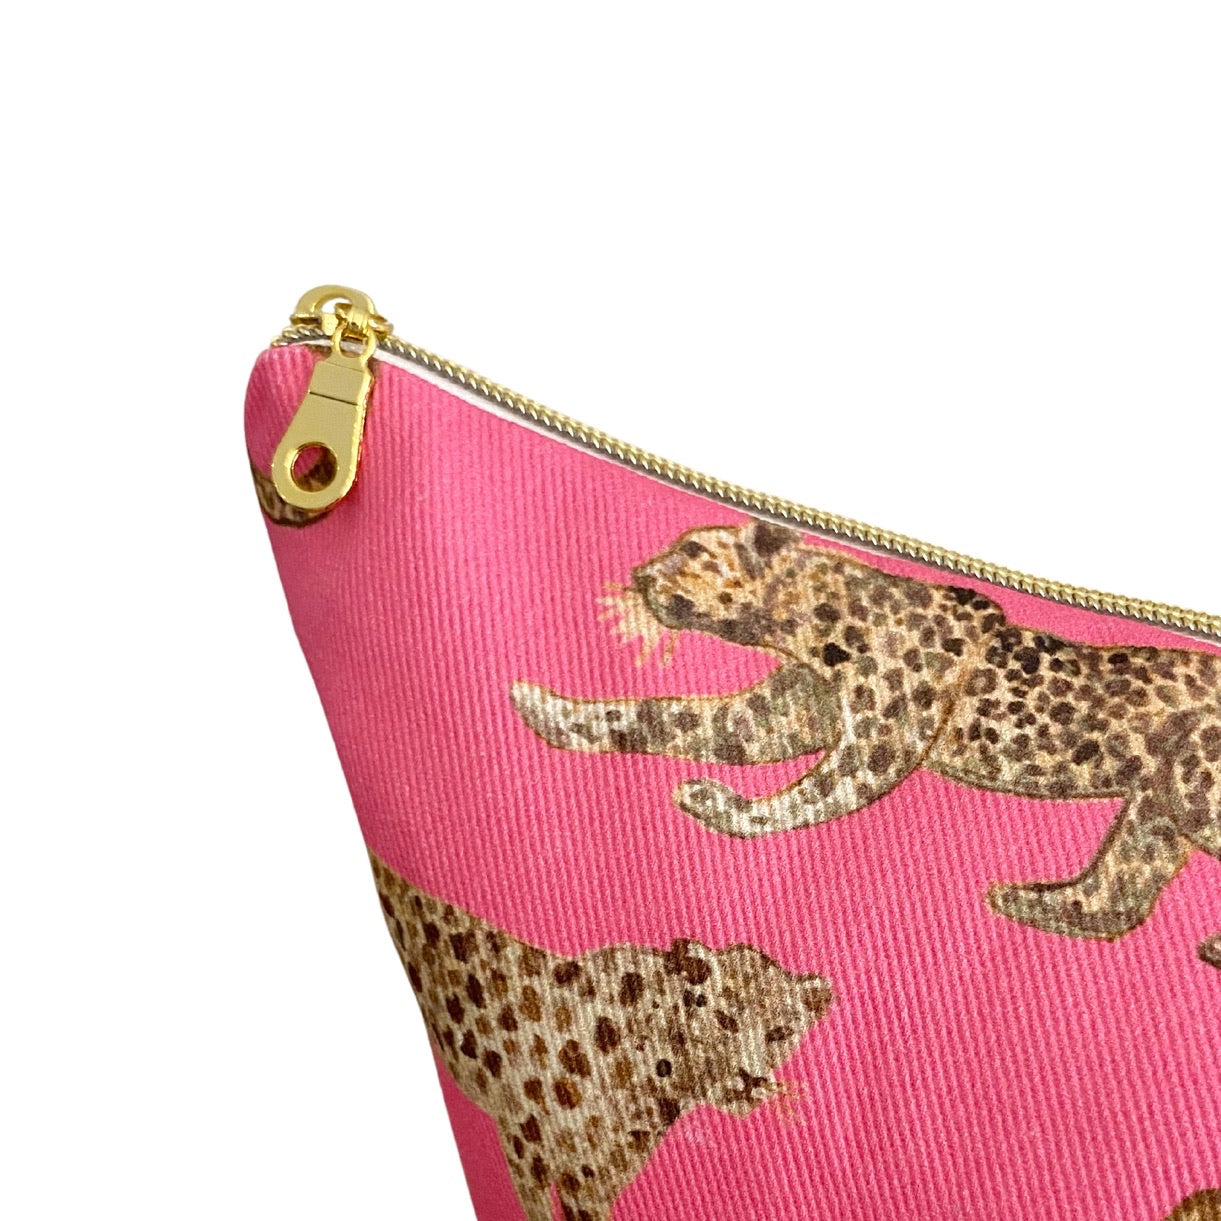 Pink Leopards Pillow Cover - Designed by Danika Herrick